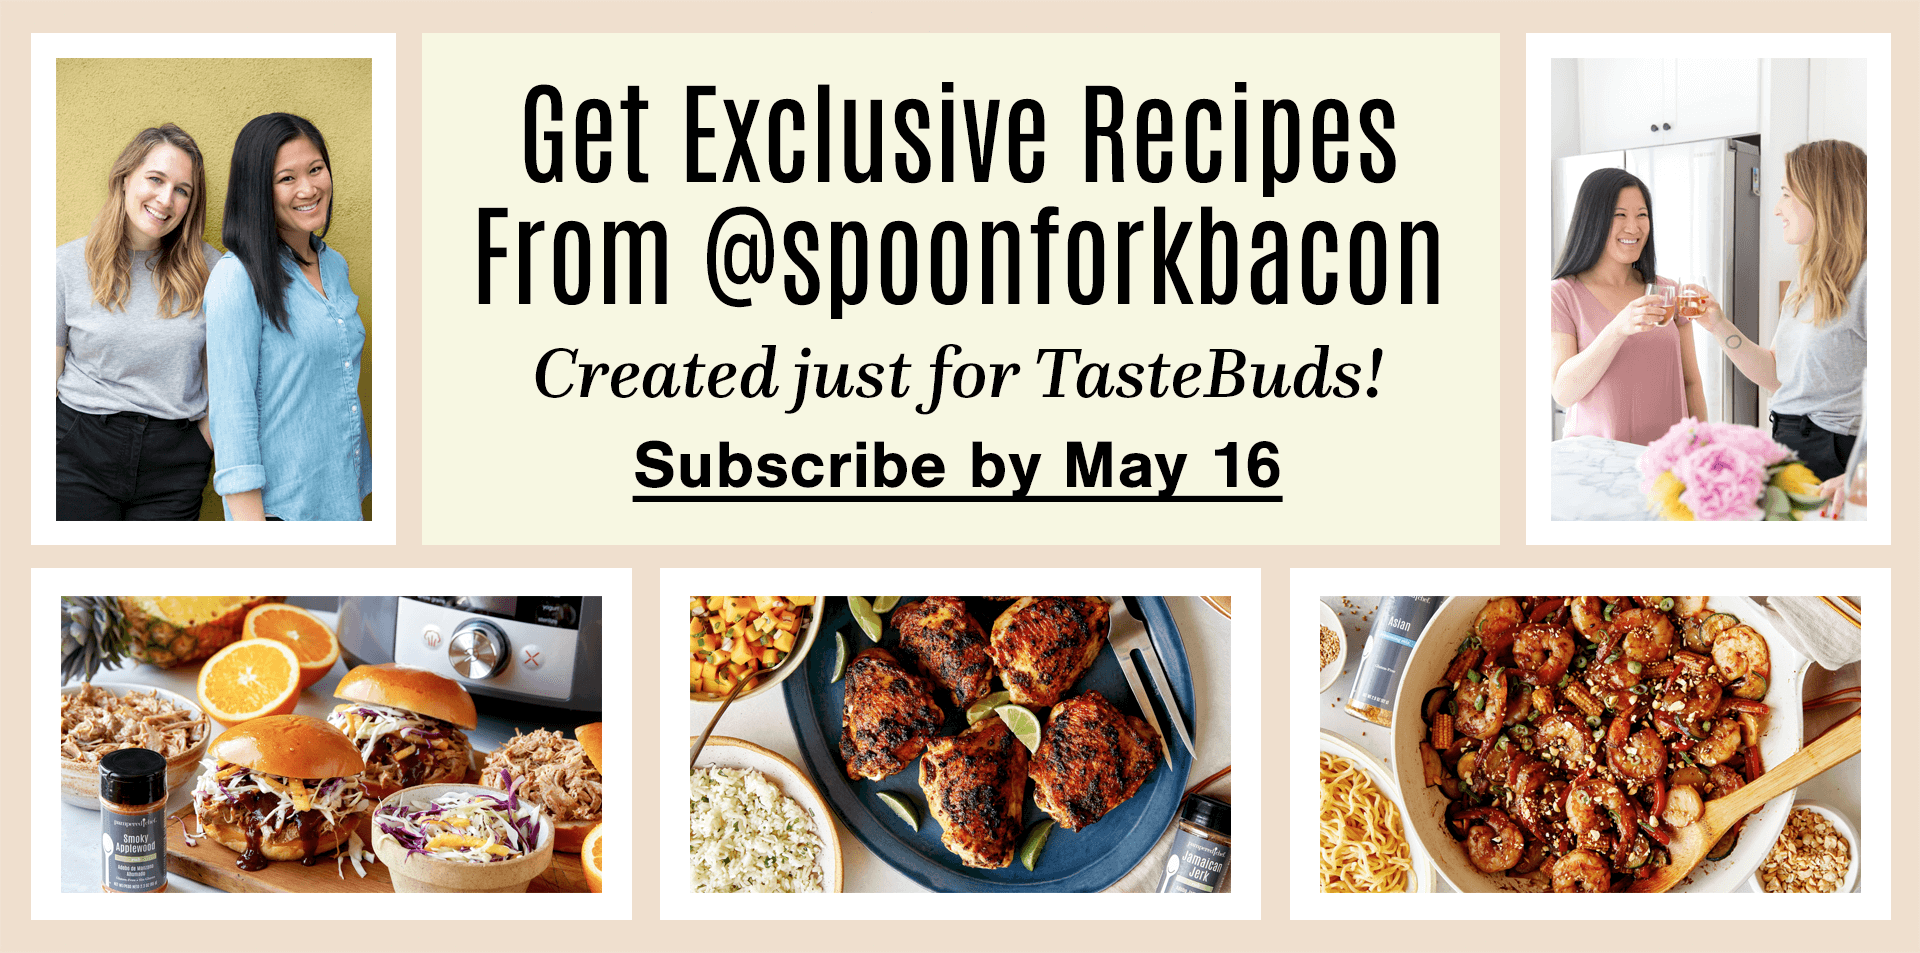 Get Exclusive Recipes From @spoonforkbacon - Created just for TasteBuds! - Subscribe by May 16